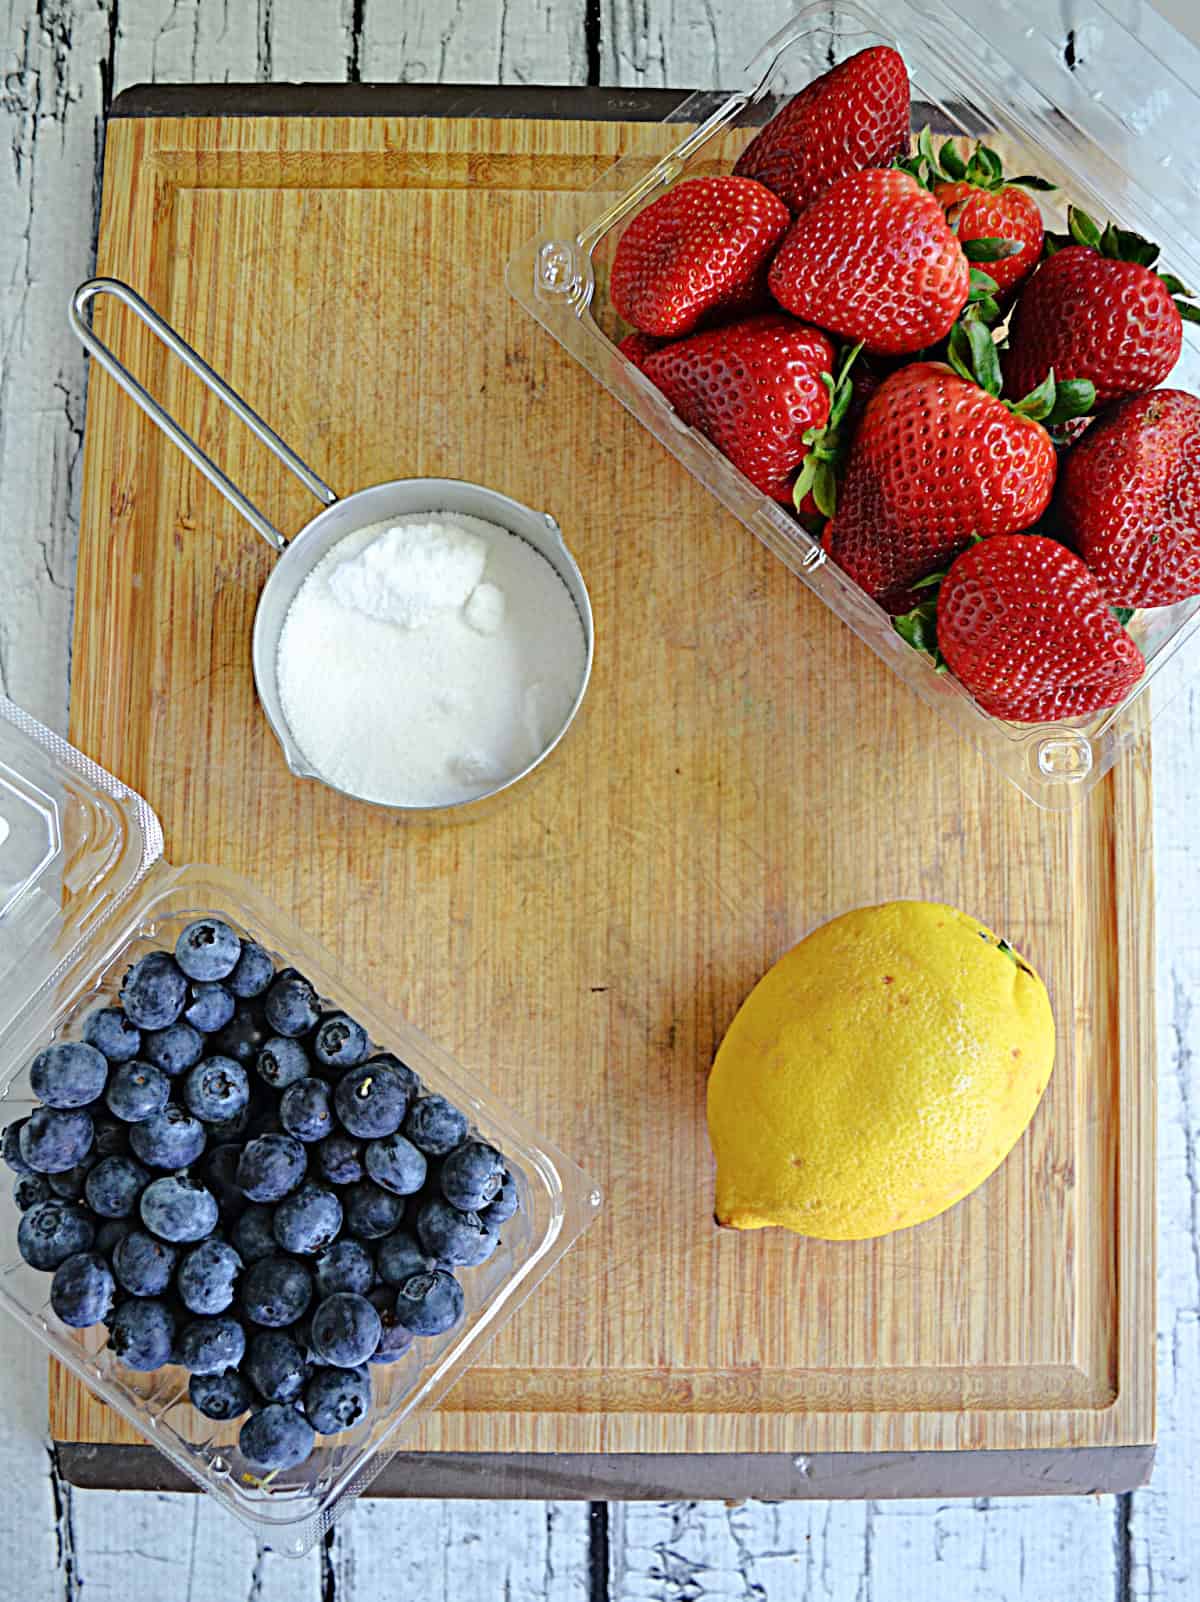 Ingredients for making Red, White, and Blue Lemonade.